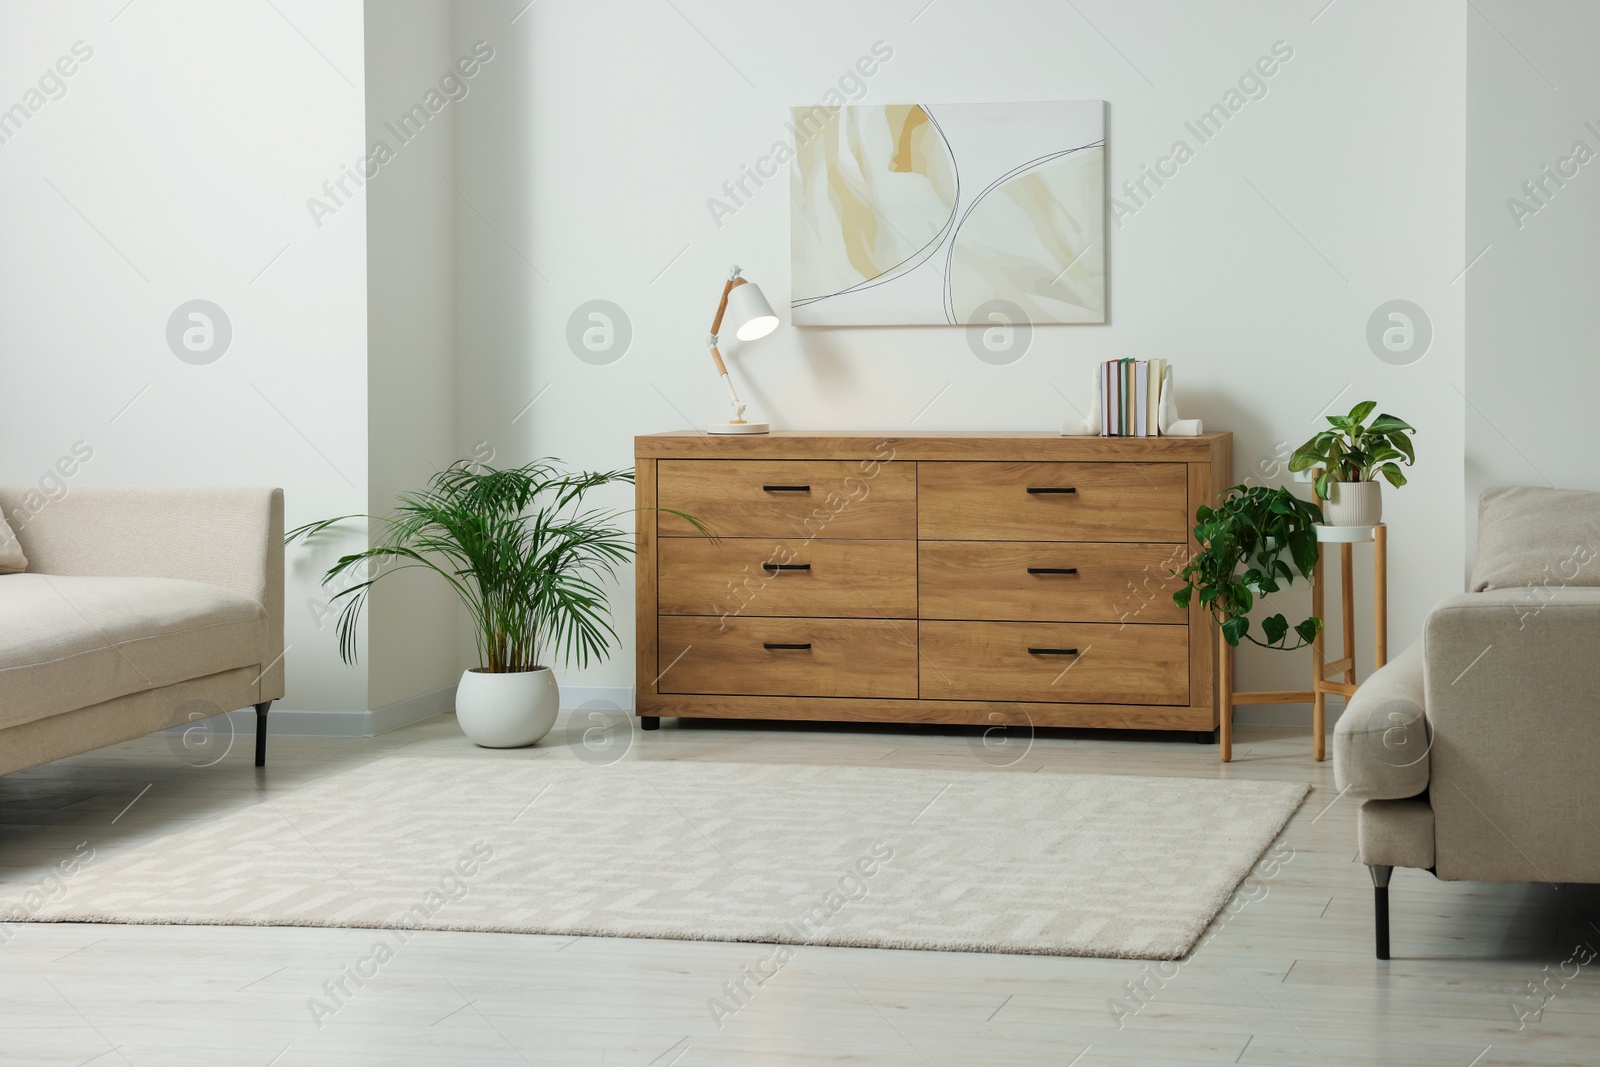 Photo of Stylish living room with wooden chest of drawers, sofas and potted plants. Interior design